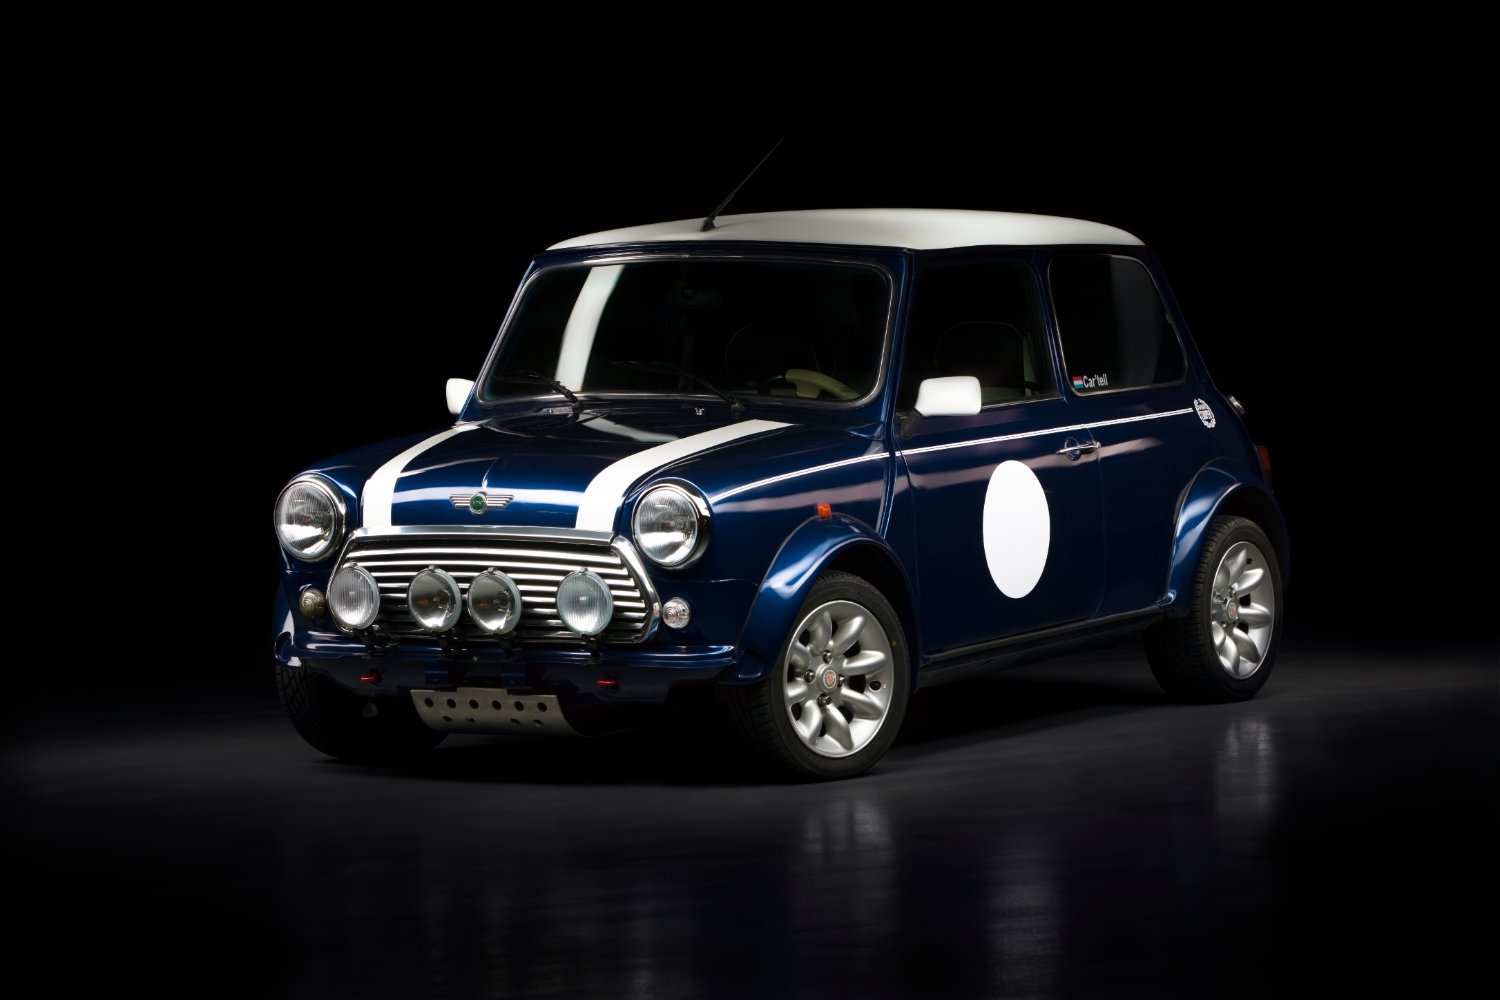 Poppy | 1996 Mini Cooper Sportspack | Auto Reflection by Baptiste Griselle